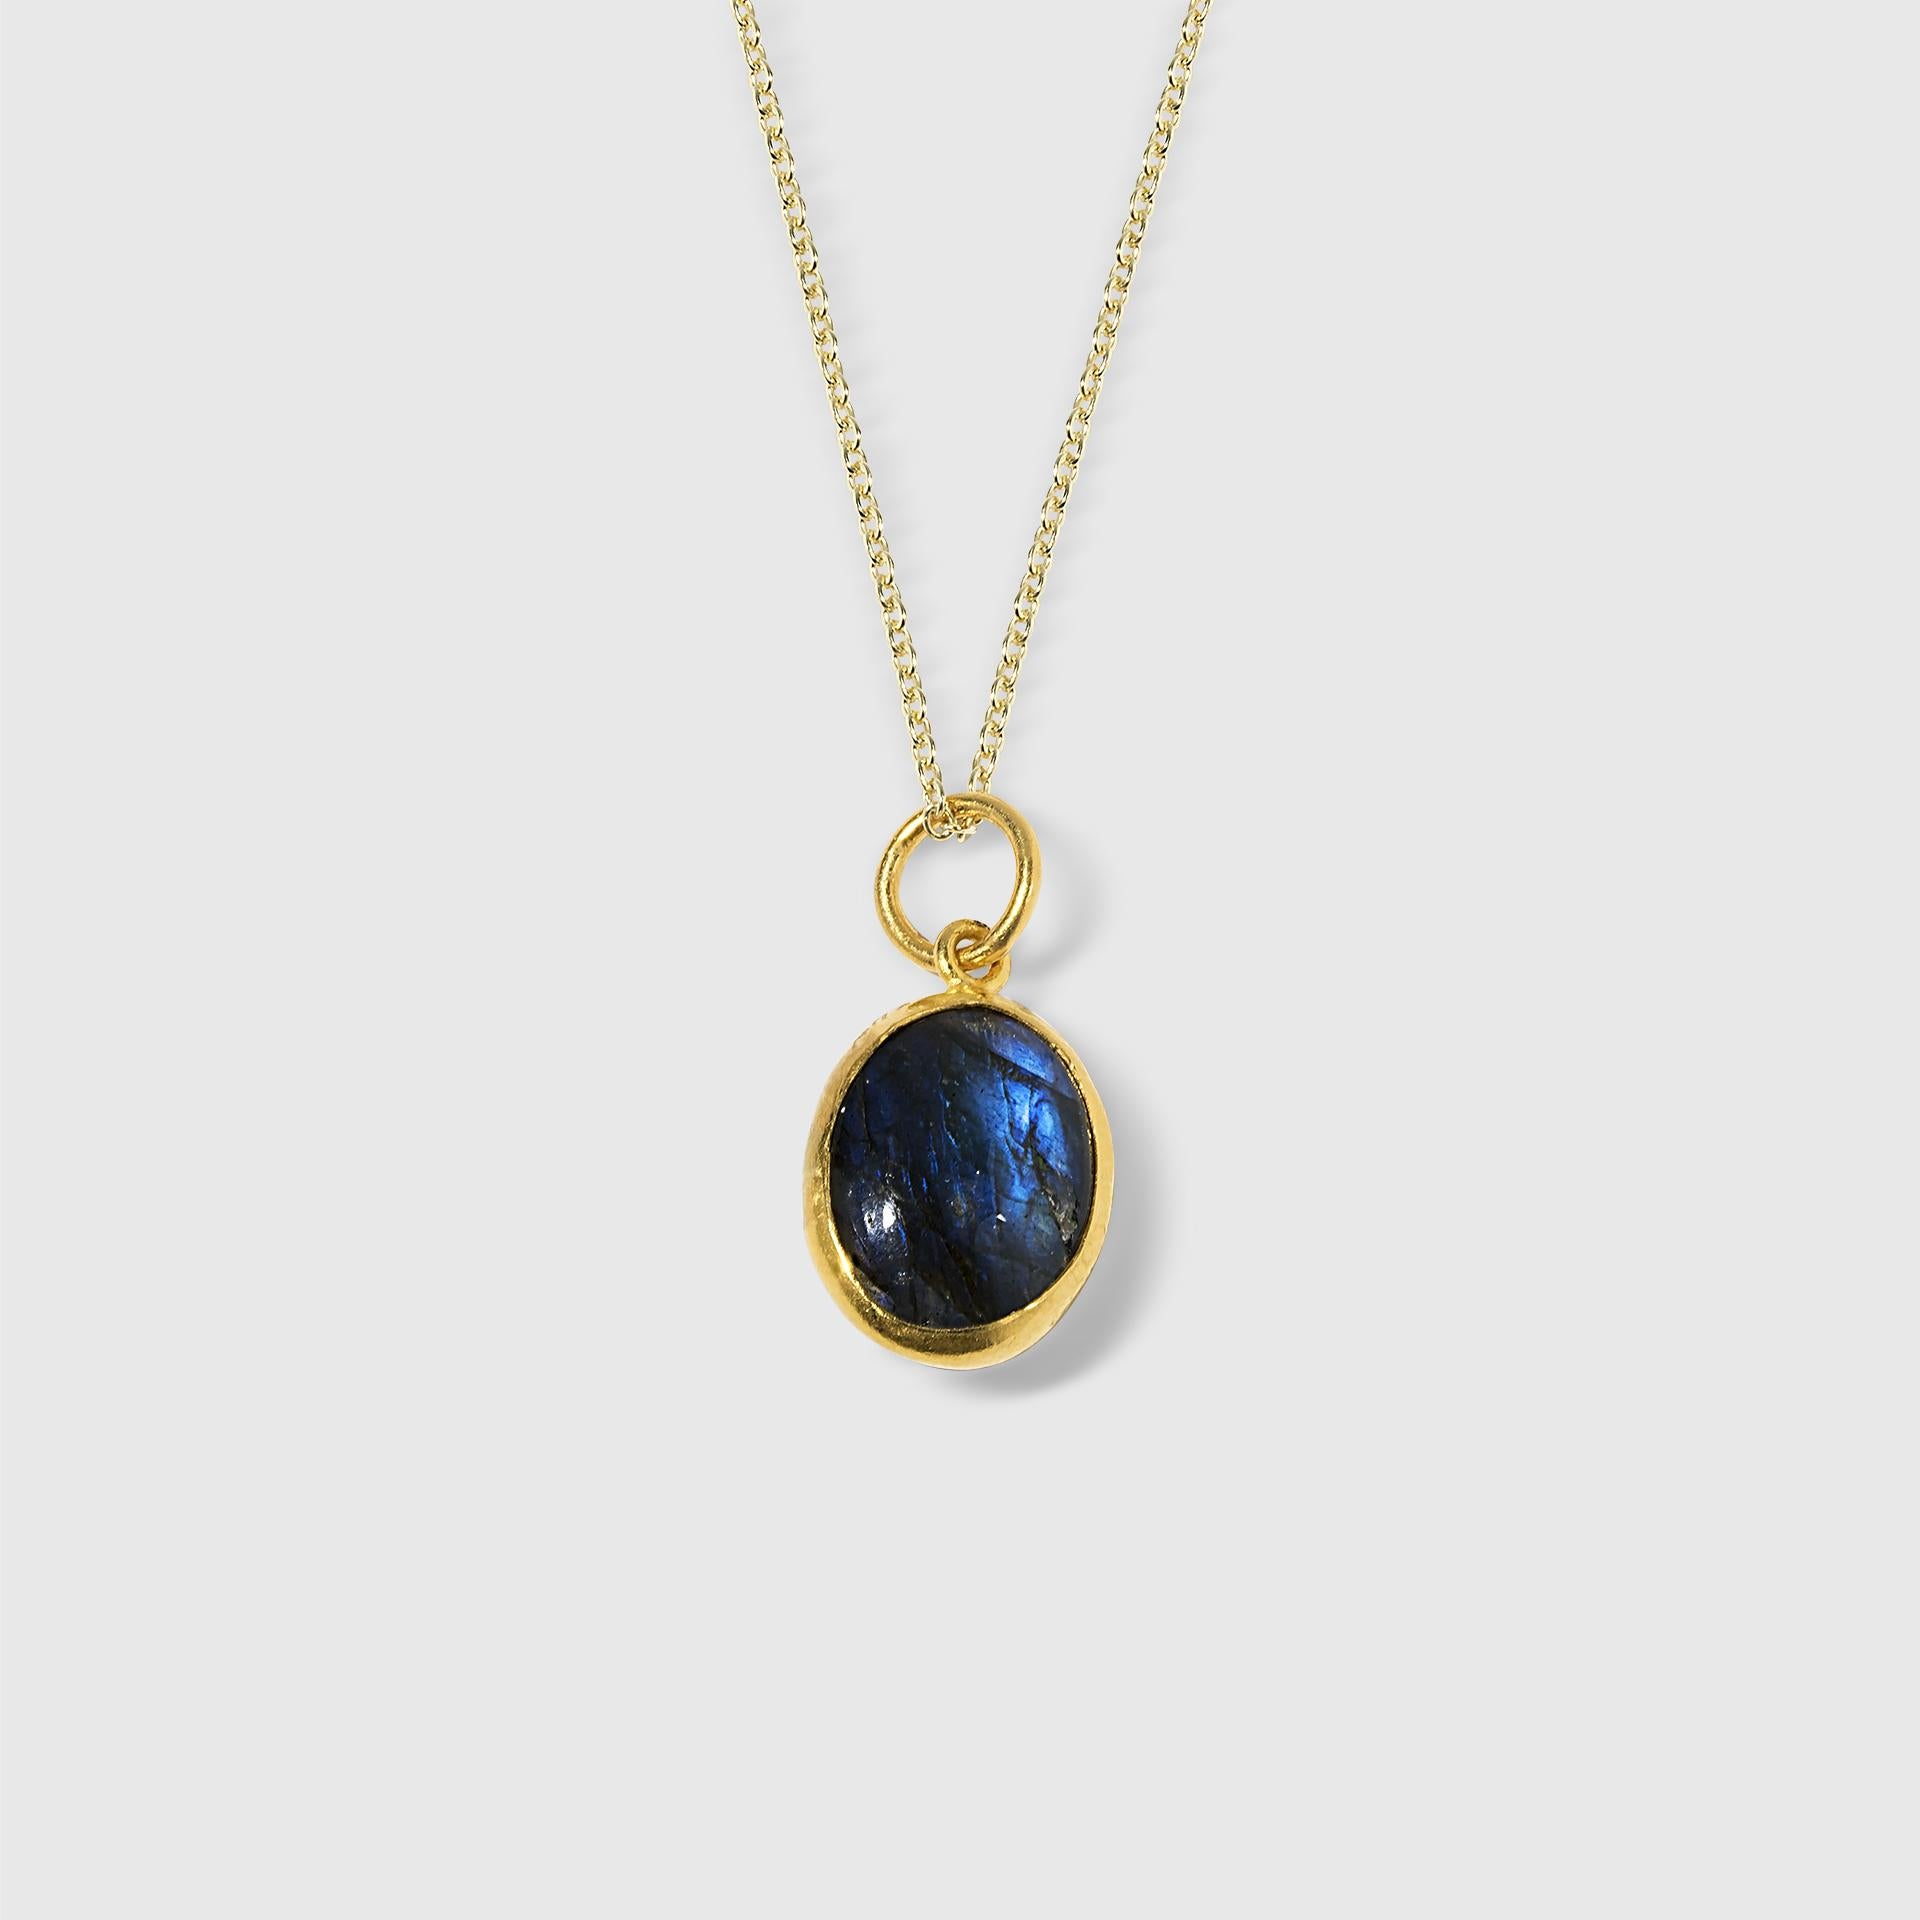 Smooth, Oval 5.45ct Labradorite Charm Pendant Necklace, 24kt Solid Gold by Prehistoric Works of Istanbul, Turkey. These pendants pair well alone or with other coin pendants or with miniature pendants. Great piece for layering or on its own. Comes